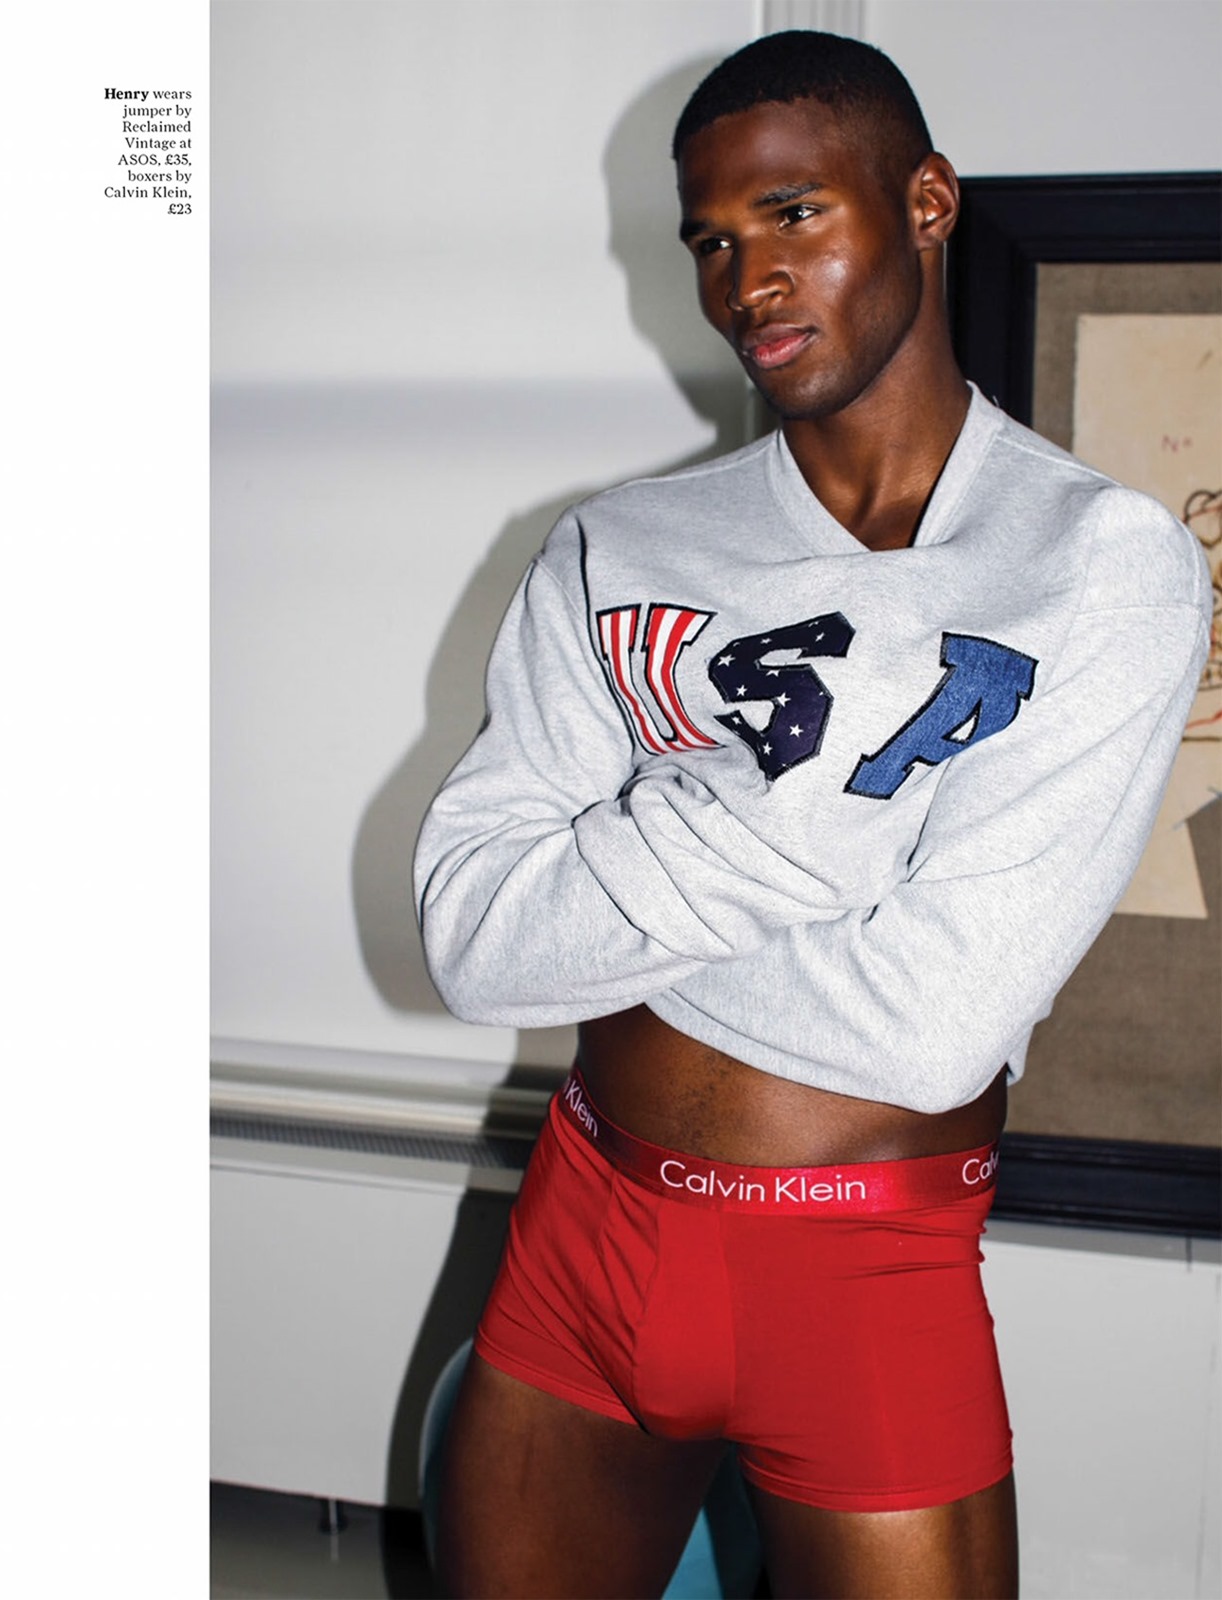 ATTITUDE UK: Veit Couturier & Henry Watkins by Joseph Lally | Image ...